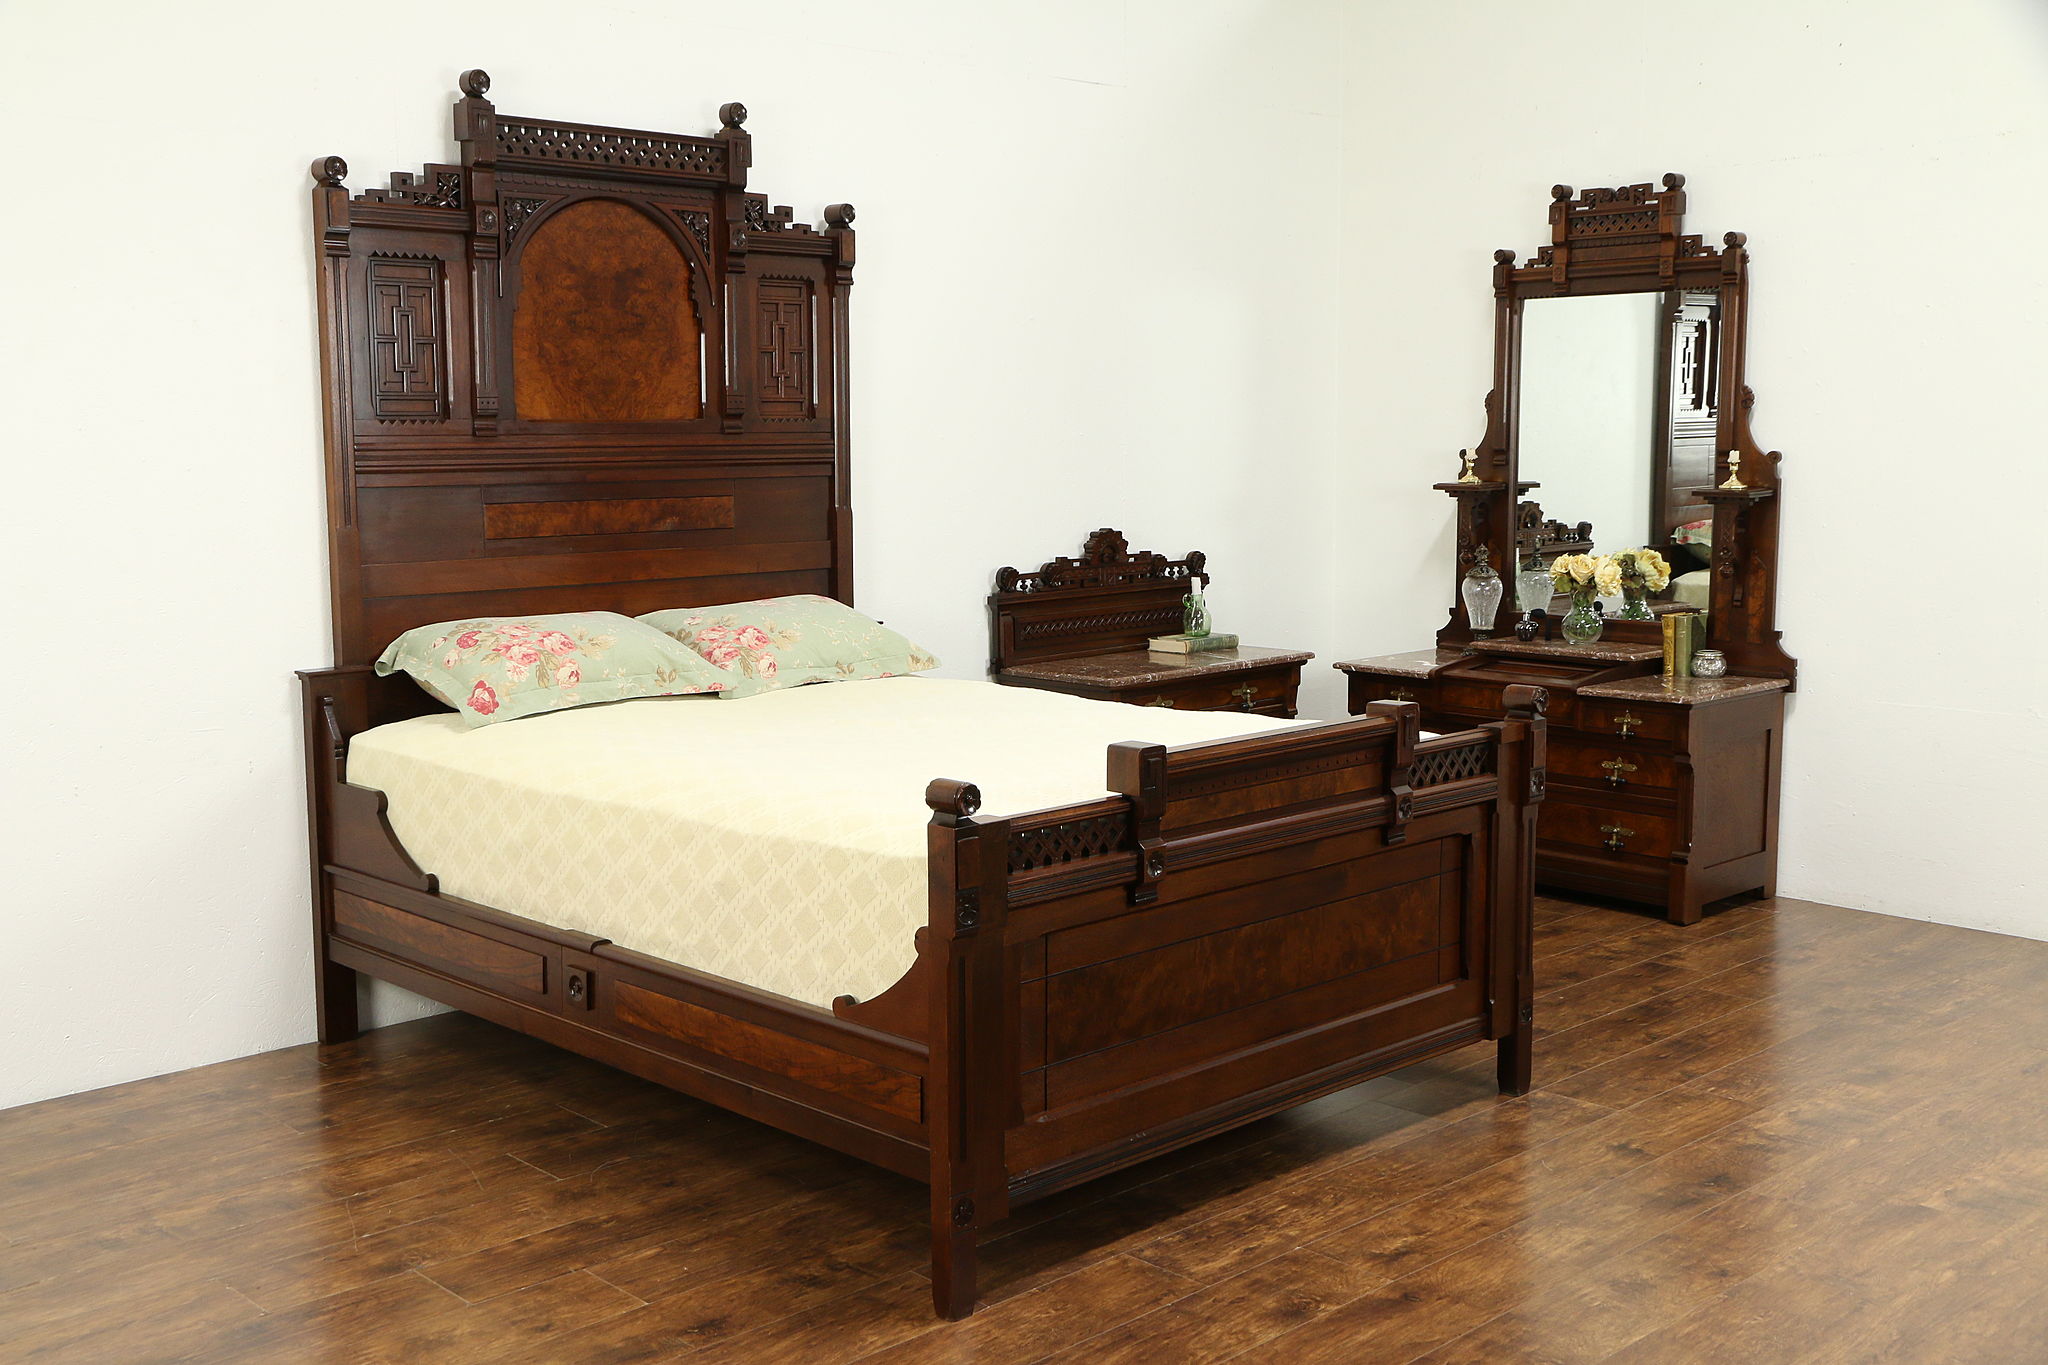 Victorian Eastlake Antique Queen Size, Ornate Queen Size Bed